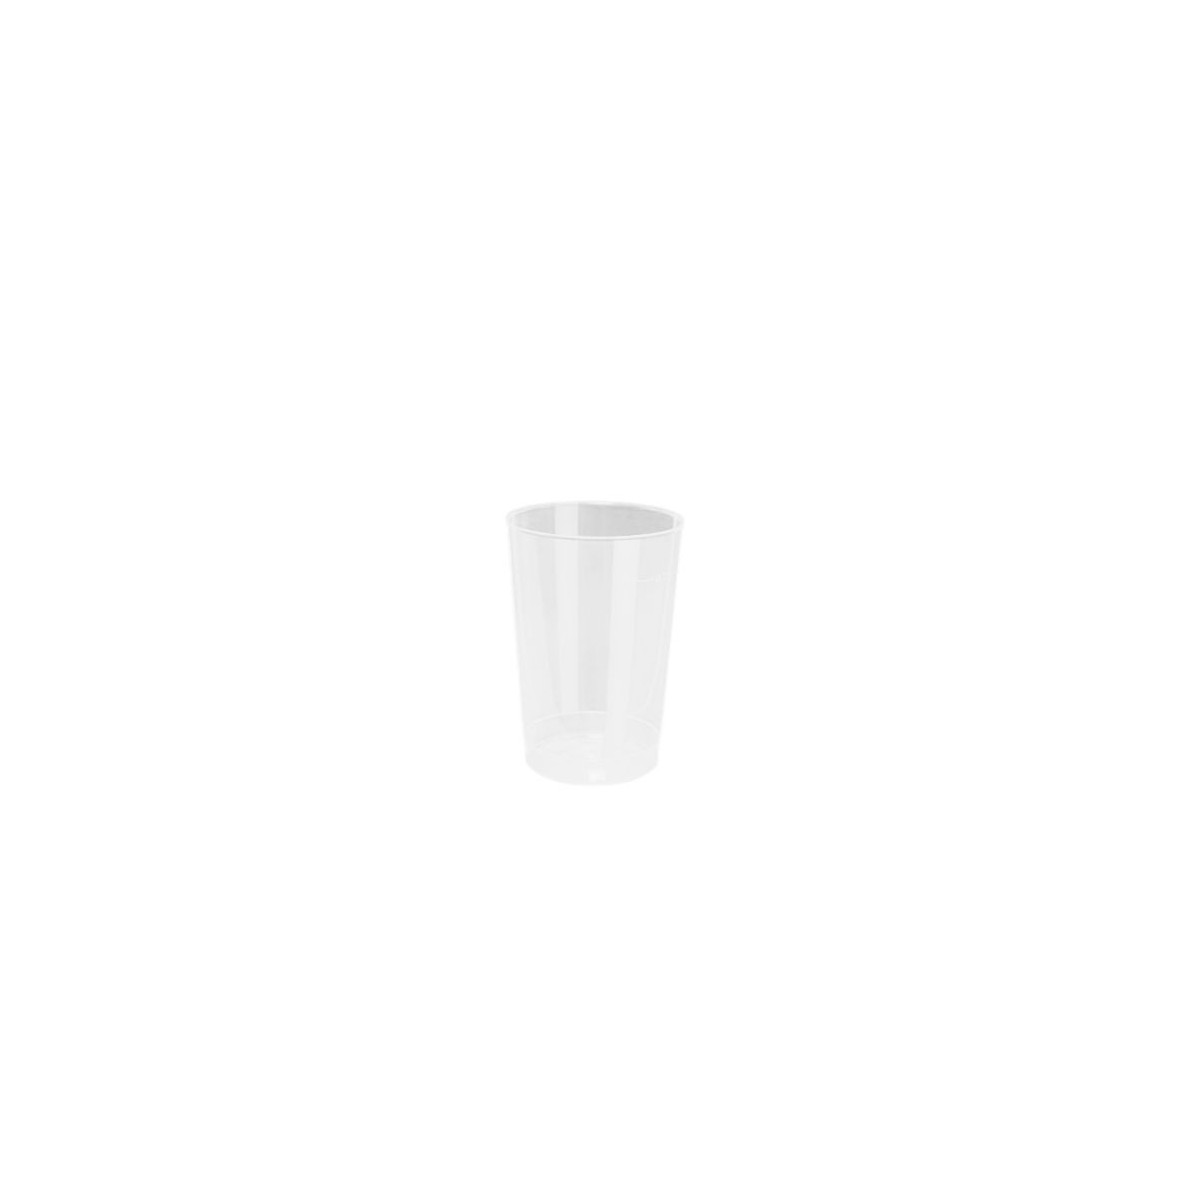 PP CLEAR REUSABLE DRINKING GLASS 6,8X9,8CM 200ML 40PCS